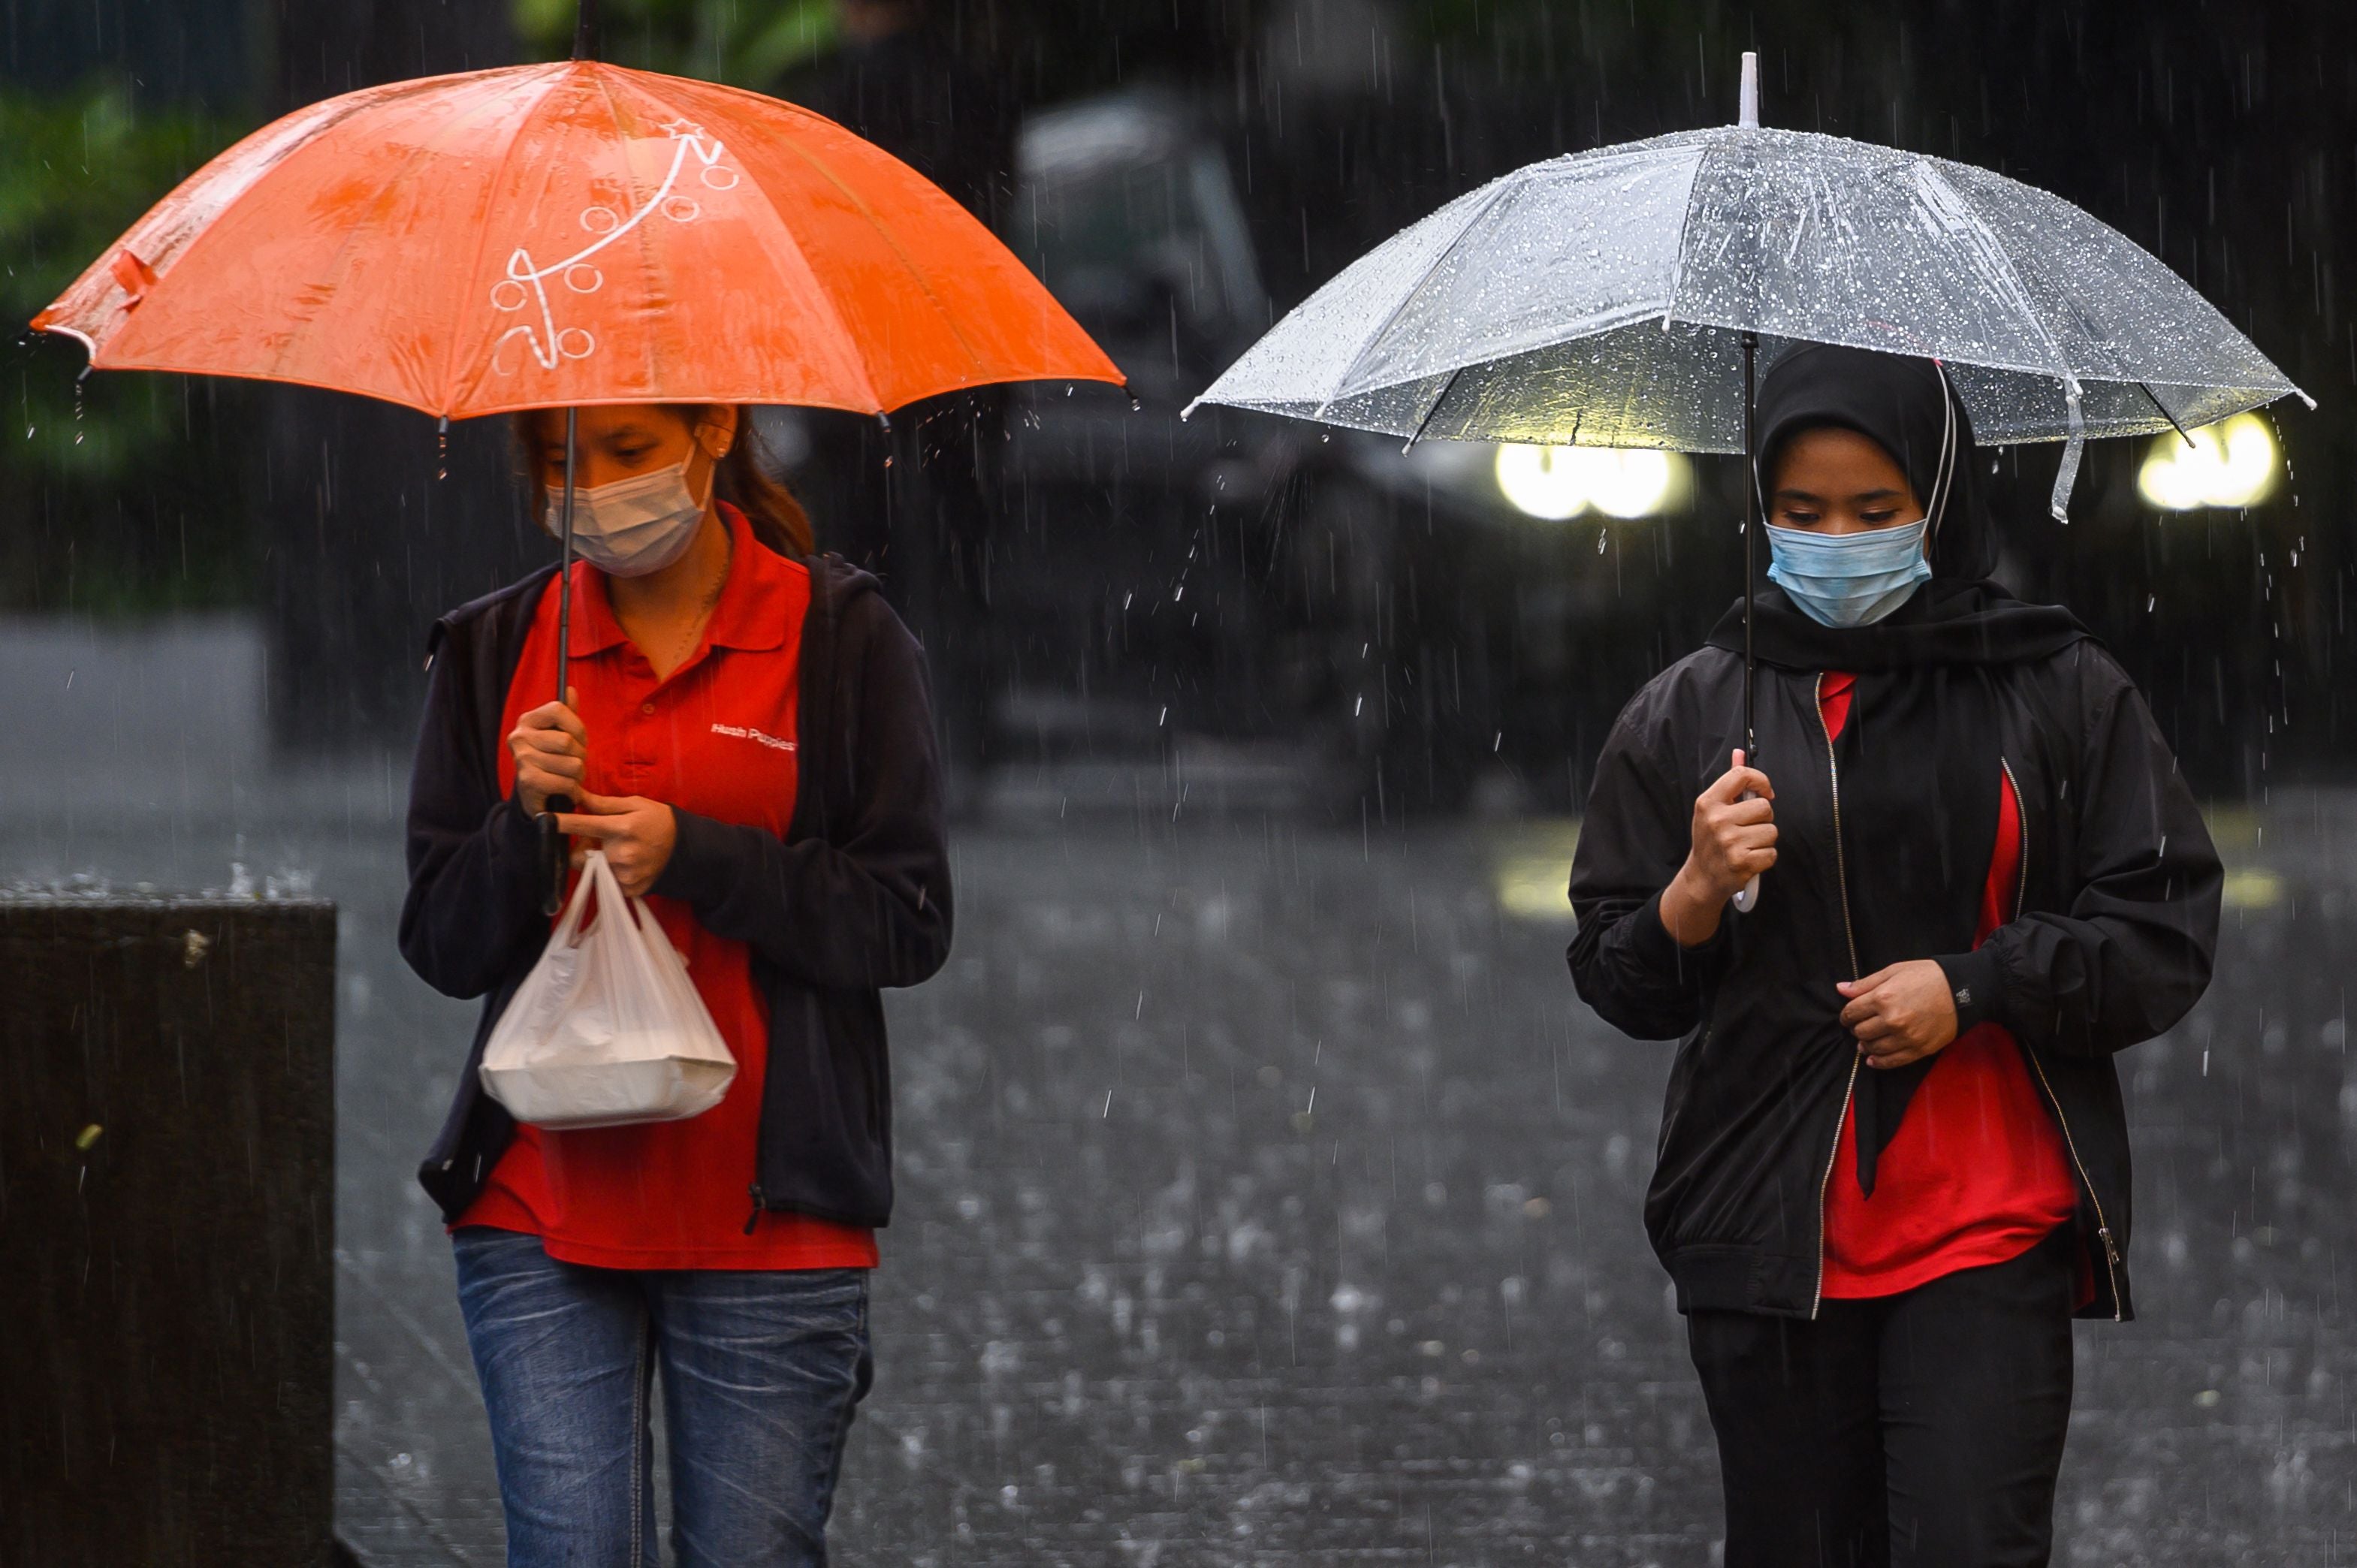 Representational: Women hold umbrellas to shelter from the rain as they walk during a heavy downpour in Malaysia